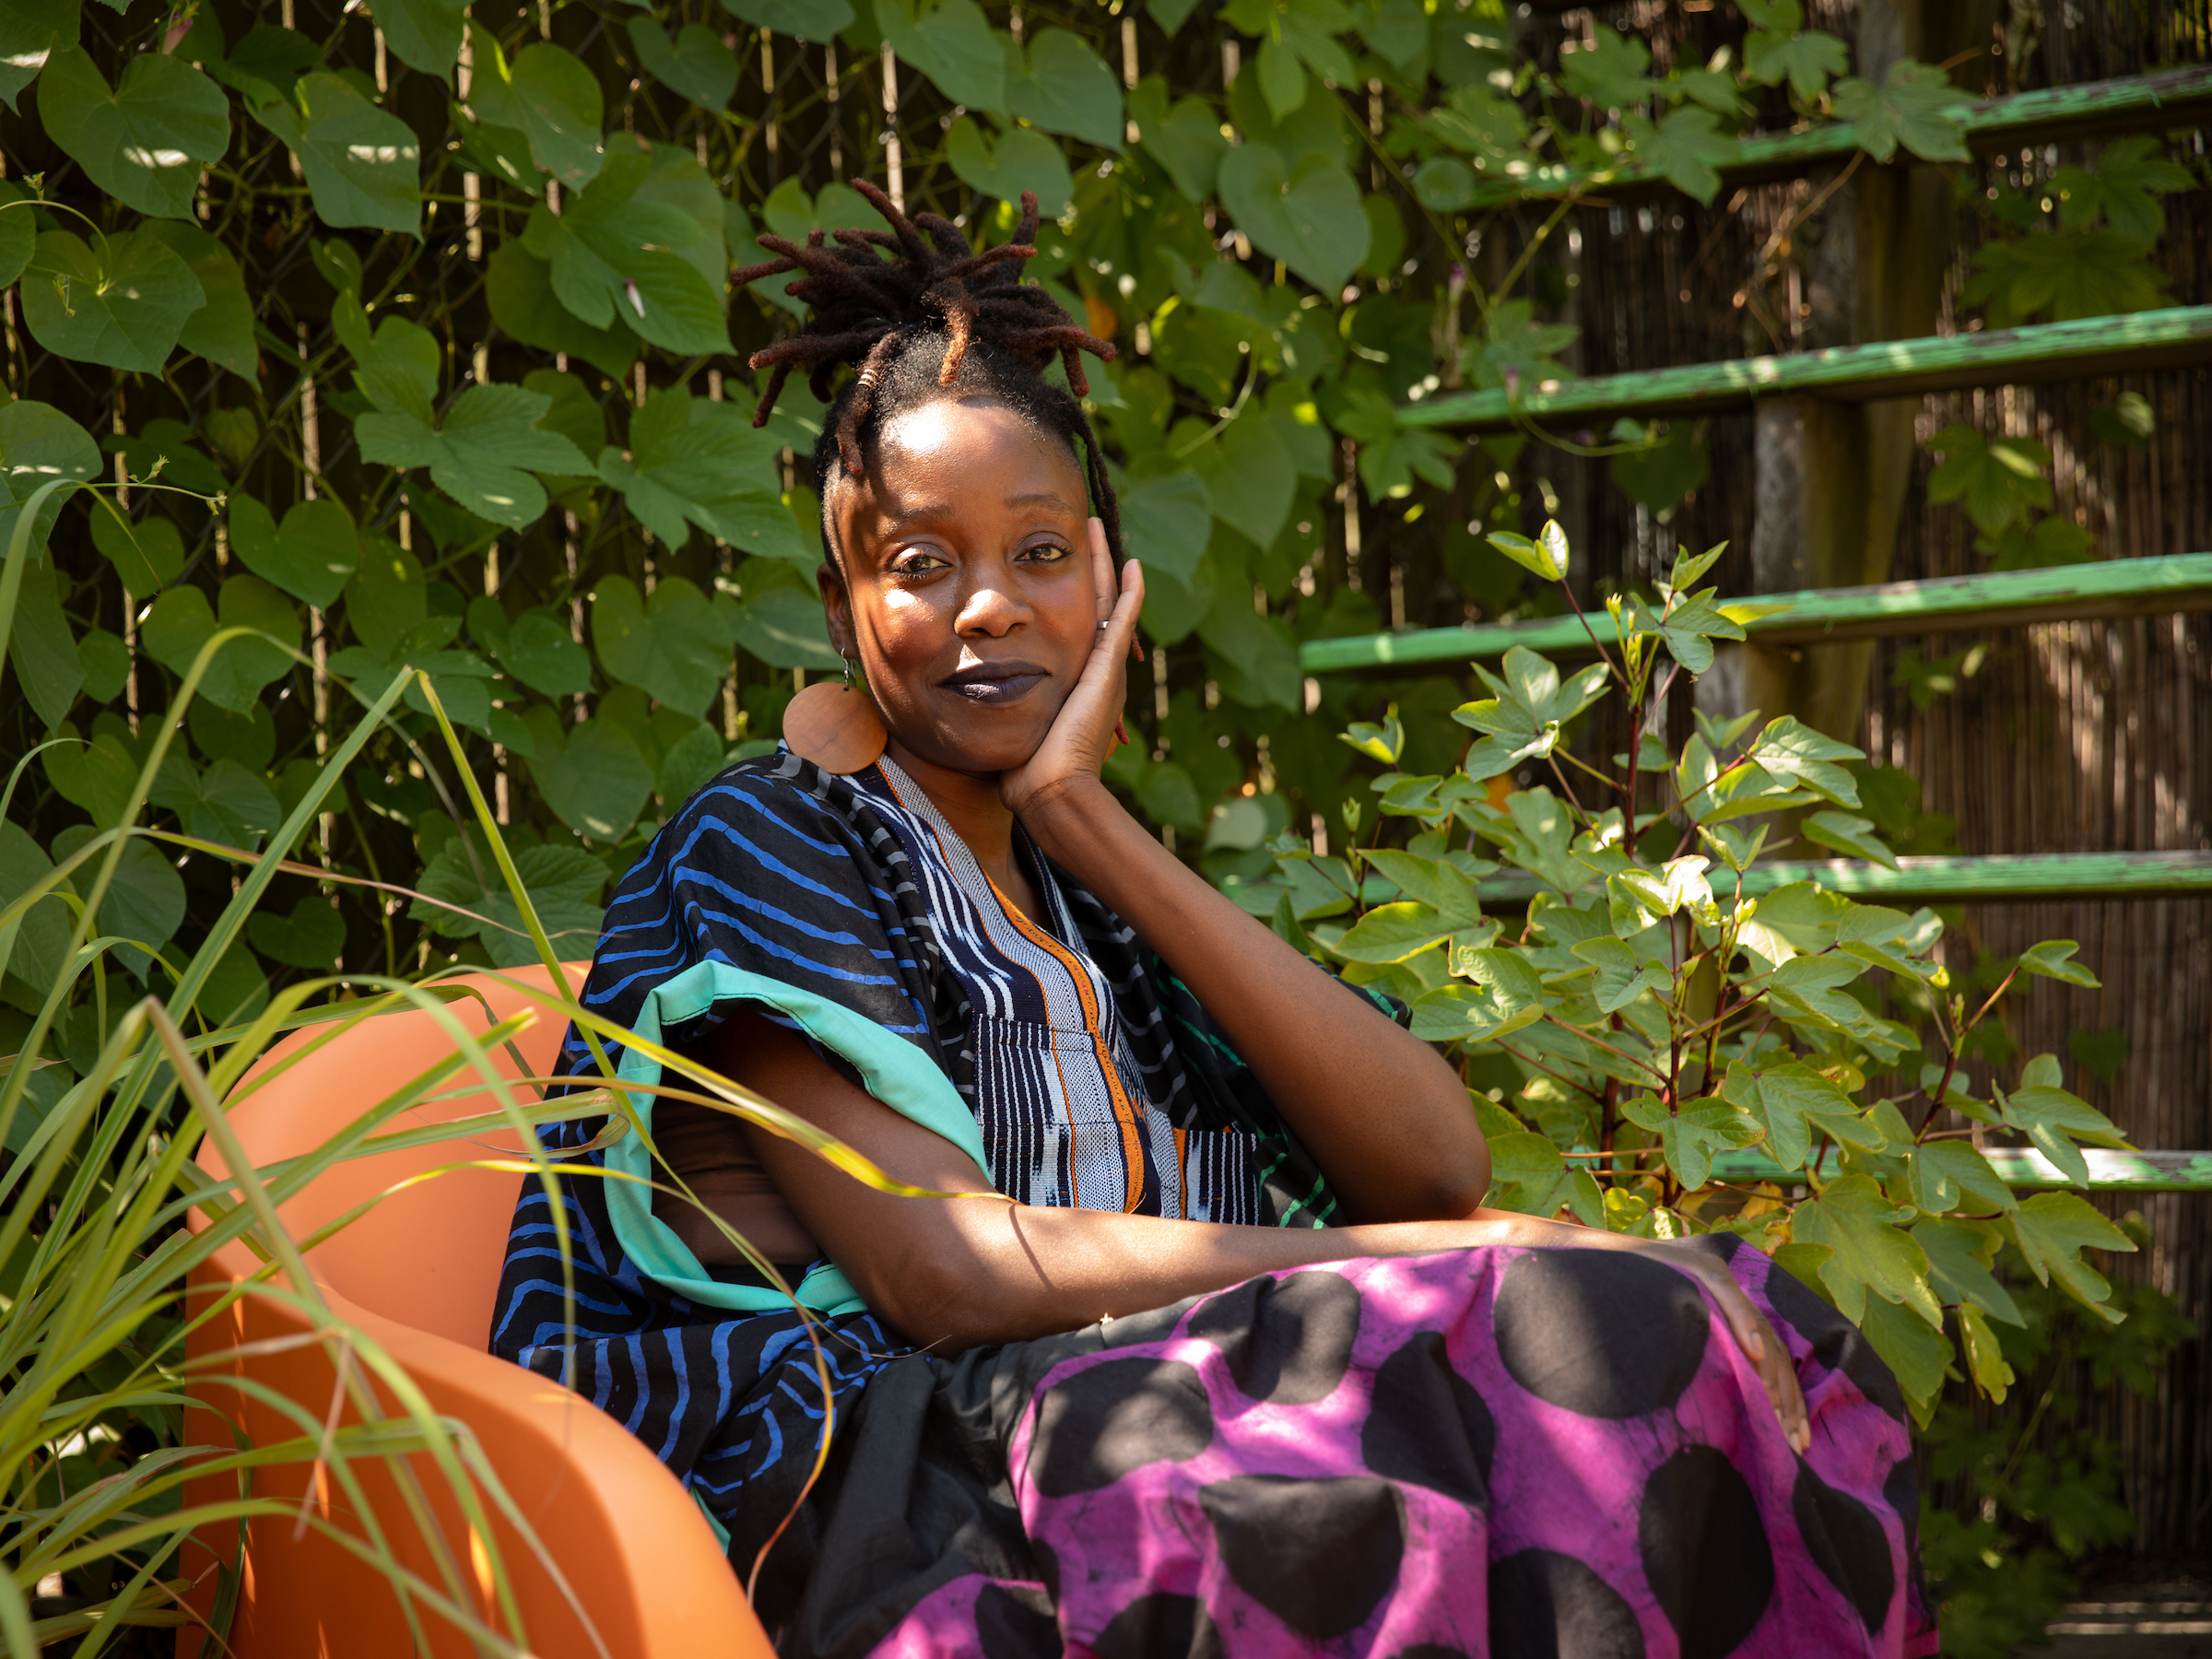 Yewande Komolafe sits in an orange chair, surrounded by plants.